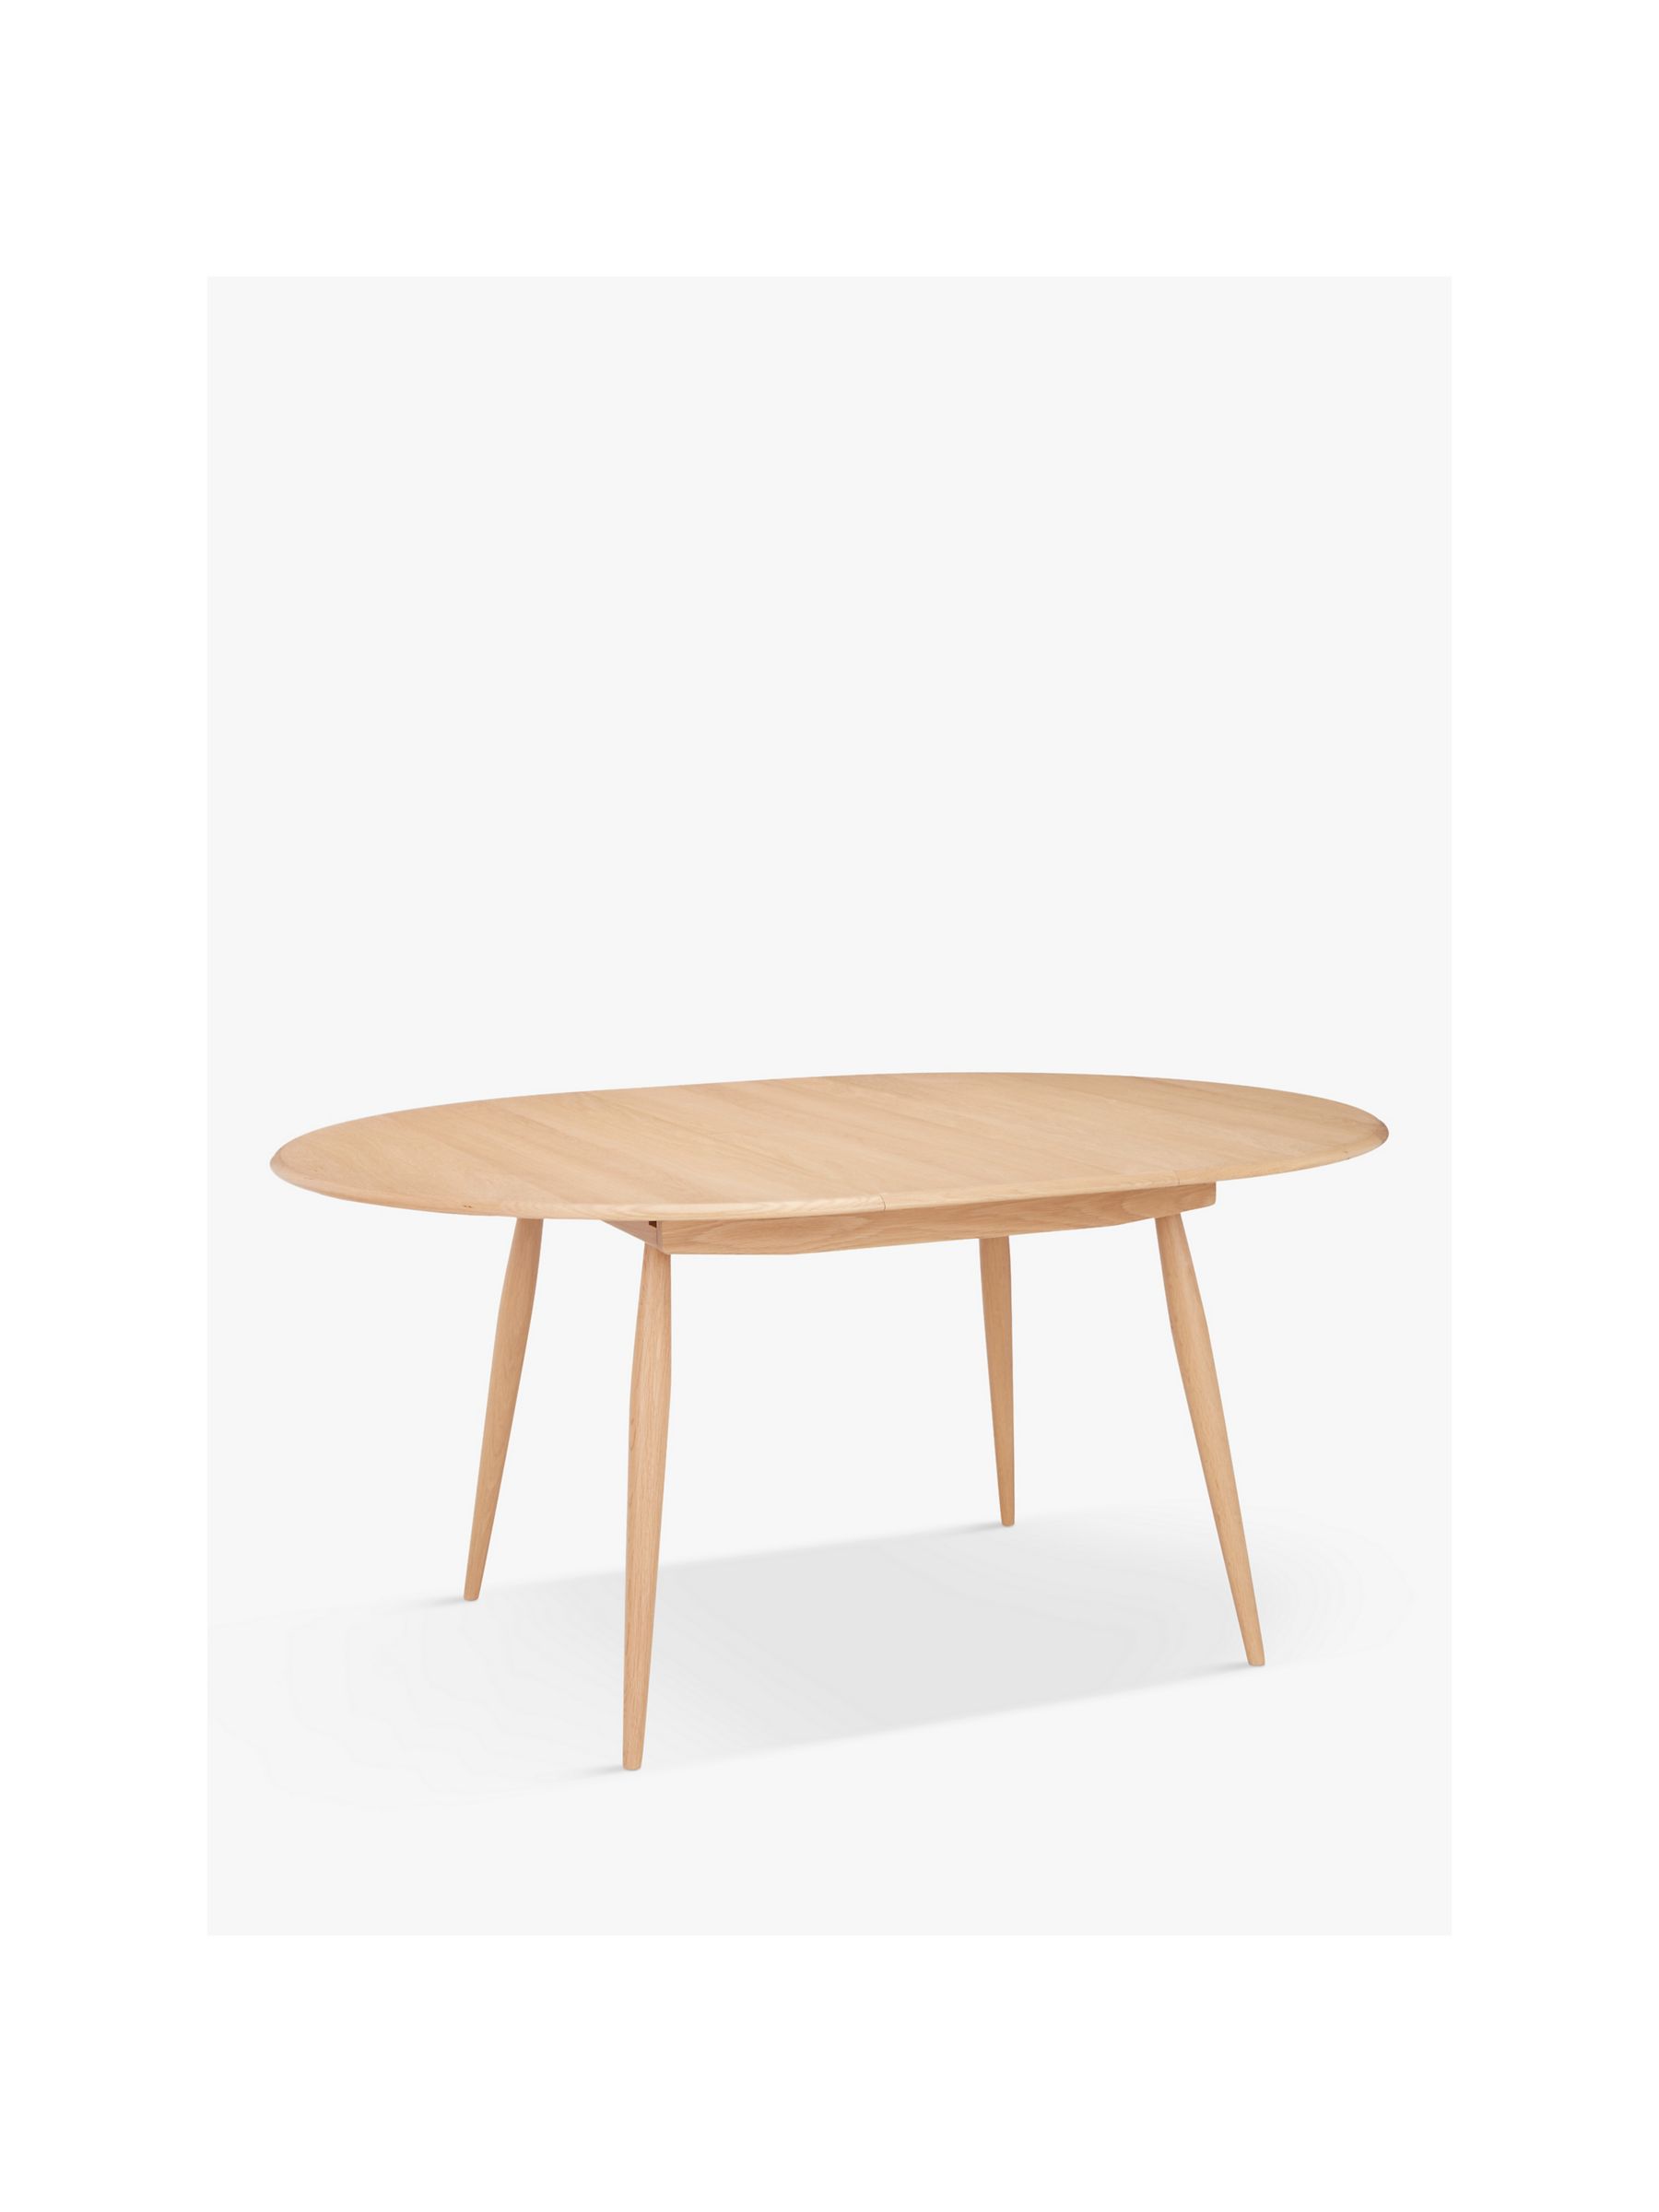 Photo of Ercol for john lewis shalstone 4-6 seater extending round dining table oak